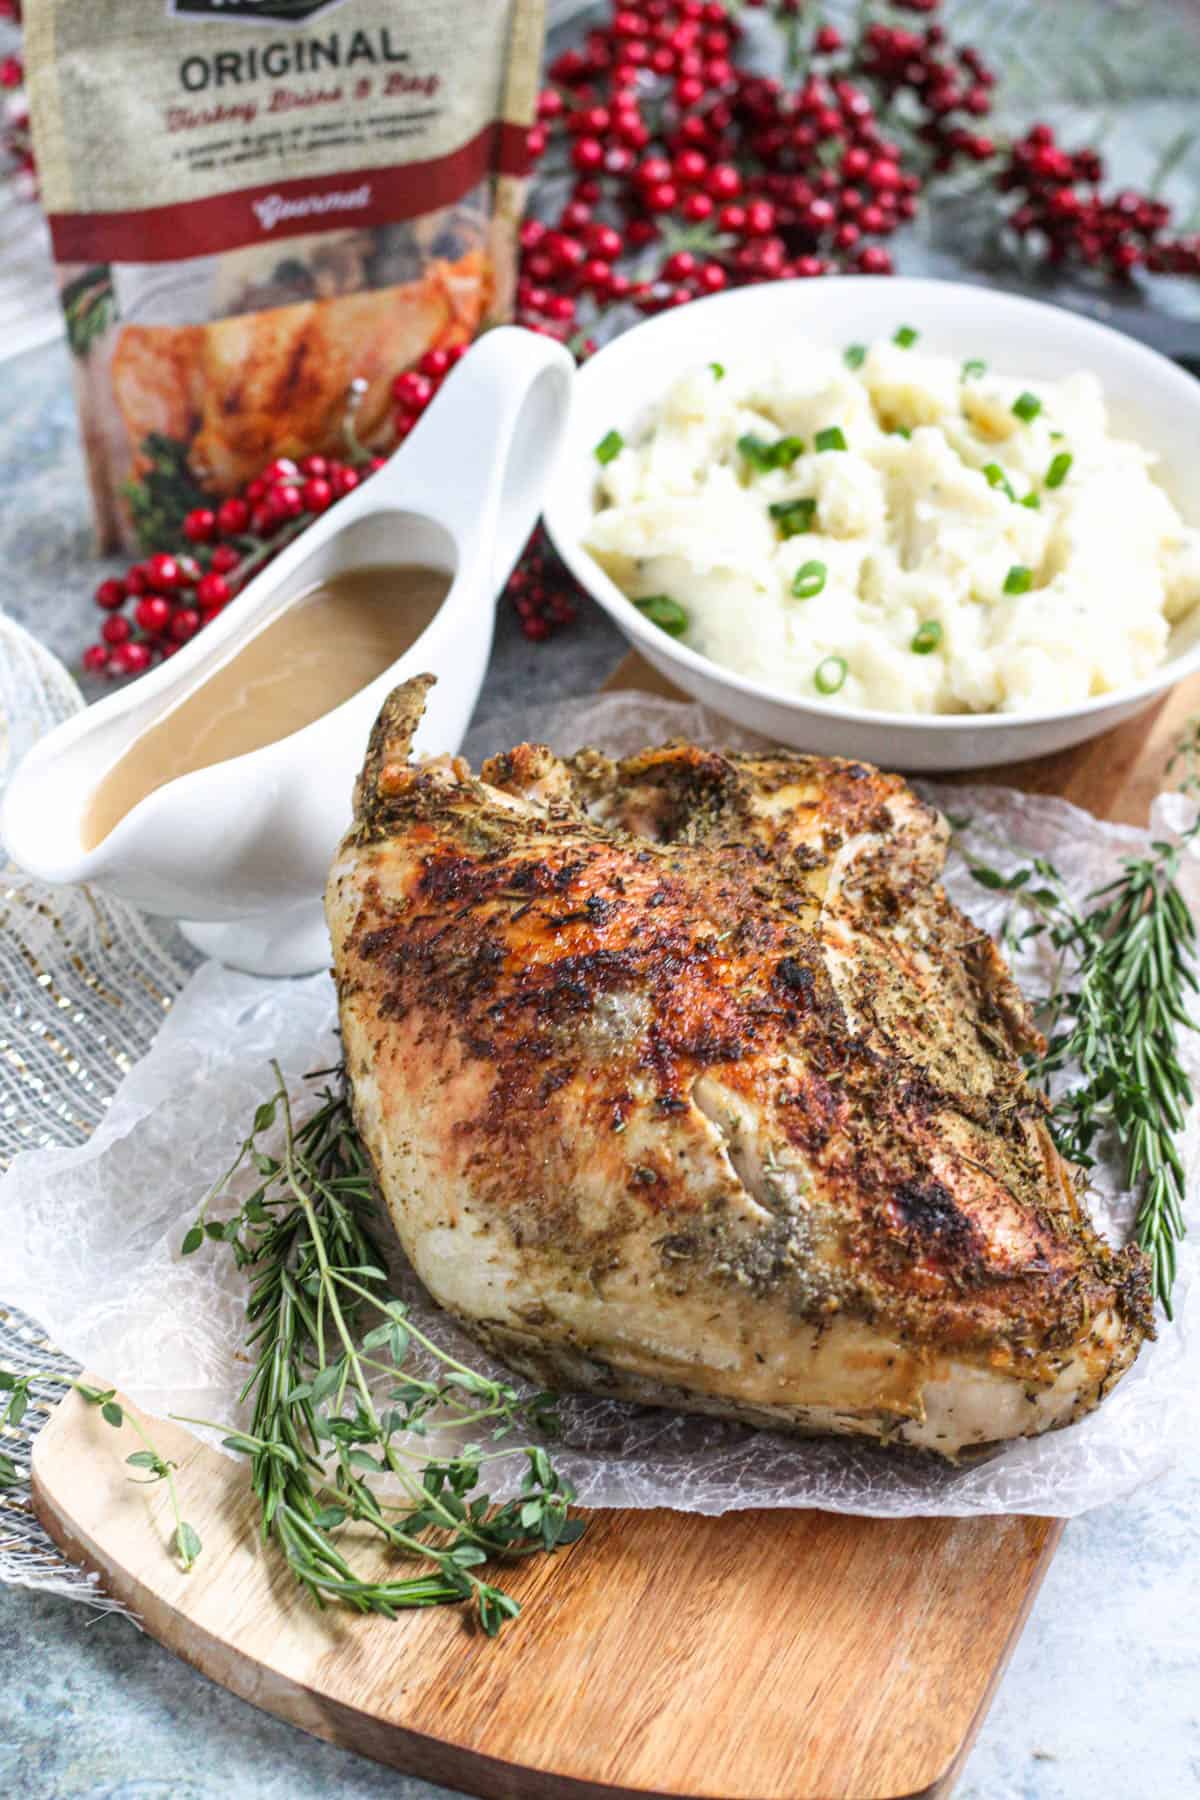 Full, roasted turkey breast surrounded by herbs